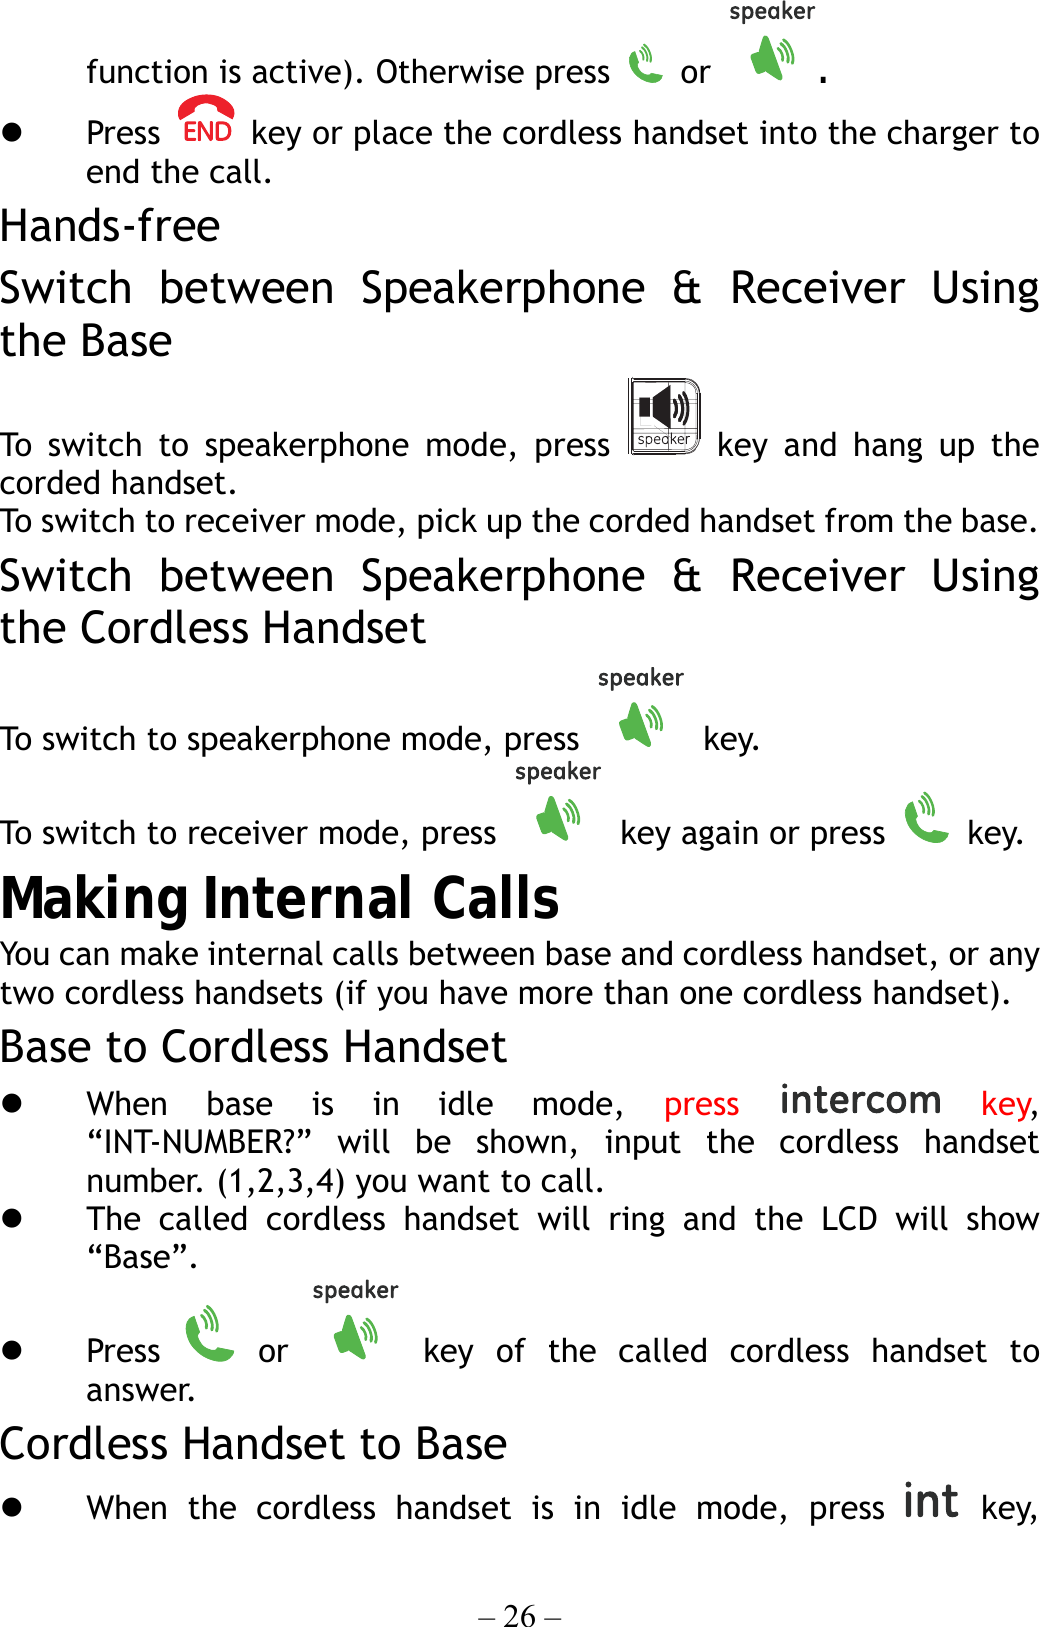 – 26 – function is active). Otherwise press   or  .   Press    key or place the cordless handset into the charger to end the call. Hands-free Switch between Speakerphone &amp; Receiver Using the Base To switch to speakerphone mode, press   key and hang up the corded handset. To swit ch to r ec eiver  mode, pick u p the corded handset from the base. Switch between Speakerphone &amp; Receiver Using the Cordless Handset To switch to speakerphone mode, press   key. To switch to receiver mode, press    key again or press   key. Making Internal Calls You can make internal calls between base and cordless handset, or any two cordless handsets (if you have more than one cordless handset). Base to Cordless Handset   When base is in idle mode, press   key, “INT-NUMBER?” will be shown, input the cordless handset number. (1,2,3,4) you want to call.   The called cordless handset will ring and the LCD will show “Base”.   Press   or   key of the called cordless handset to answer. Cordless Handset to Base   When the cordless handset is in idle mode, press   key, 